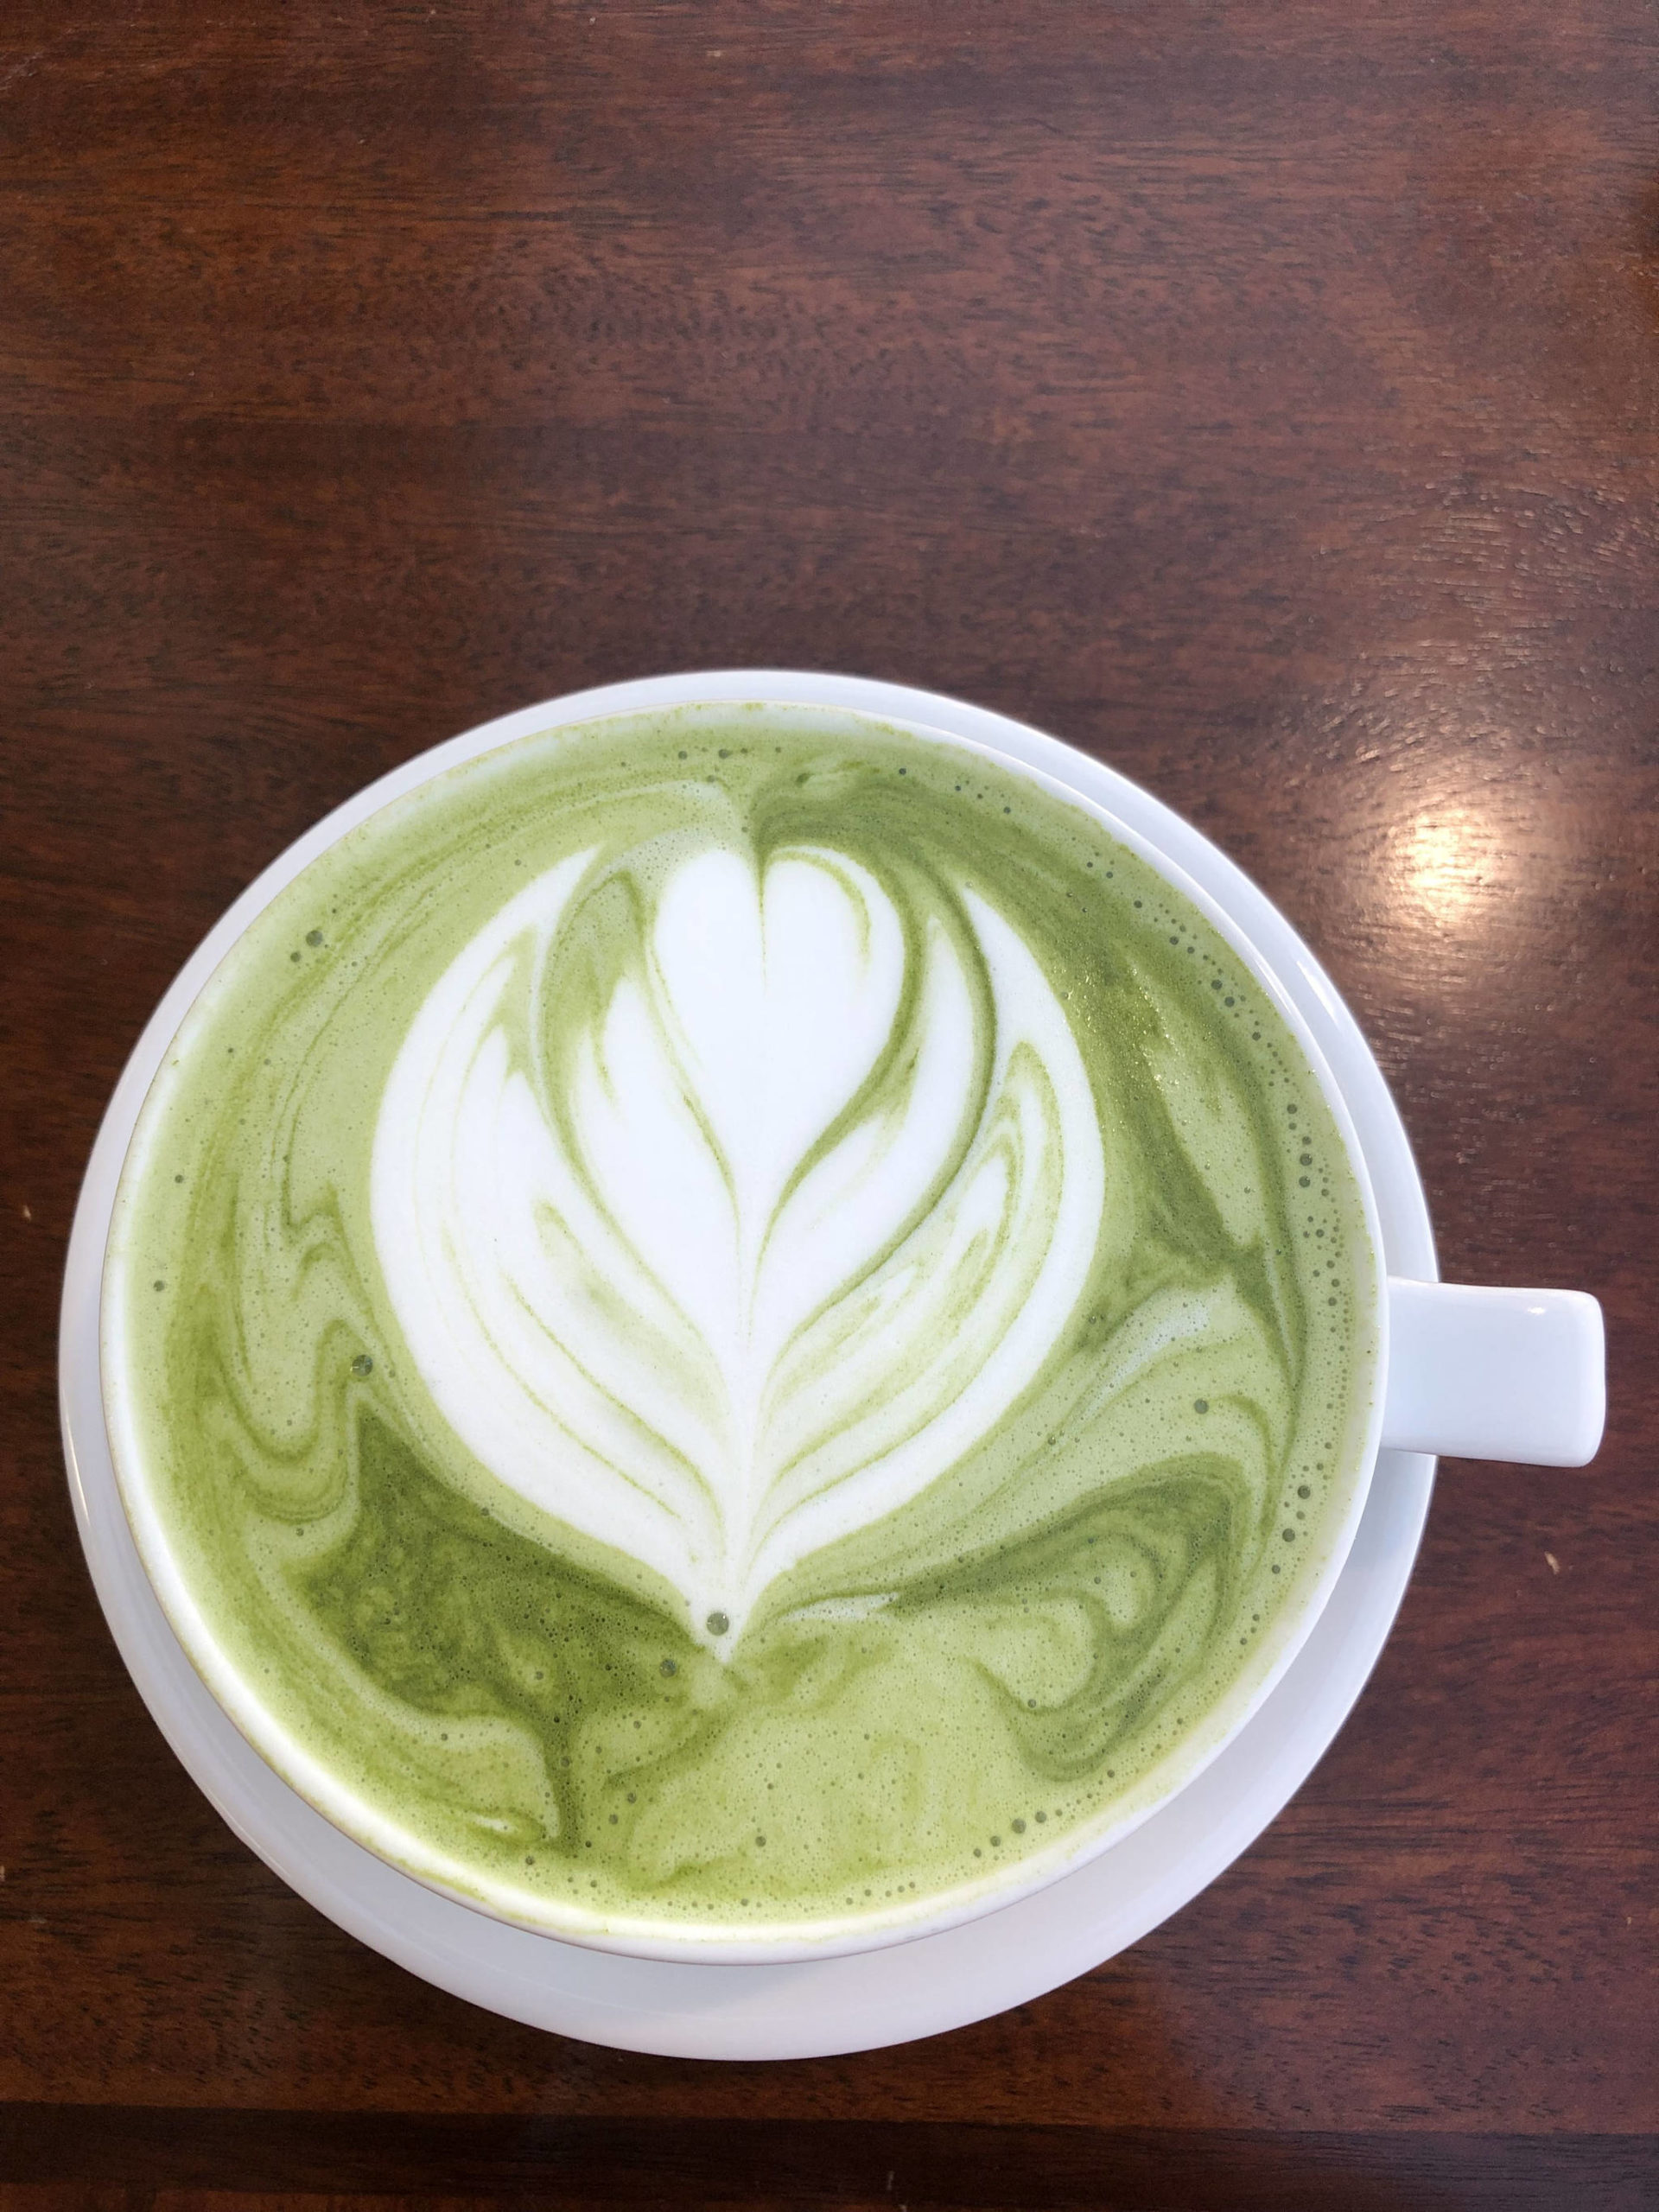 A match latte is on display on Jan. 3, 2019 at Brother’s Cafe, in Kenai, Alaska.